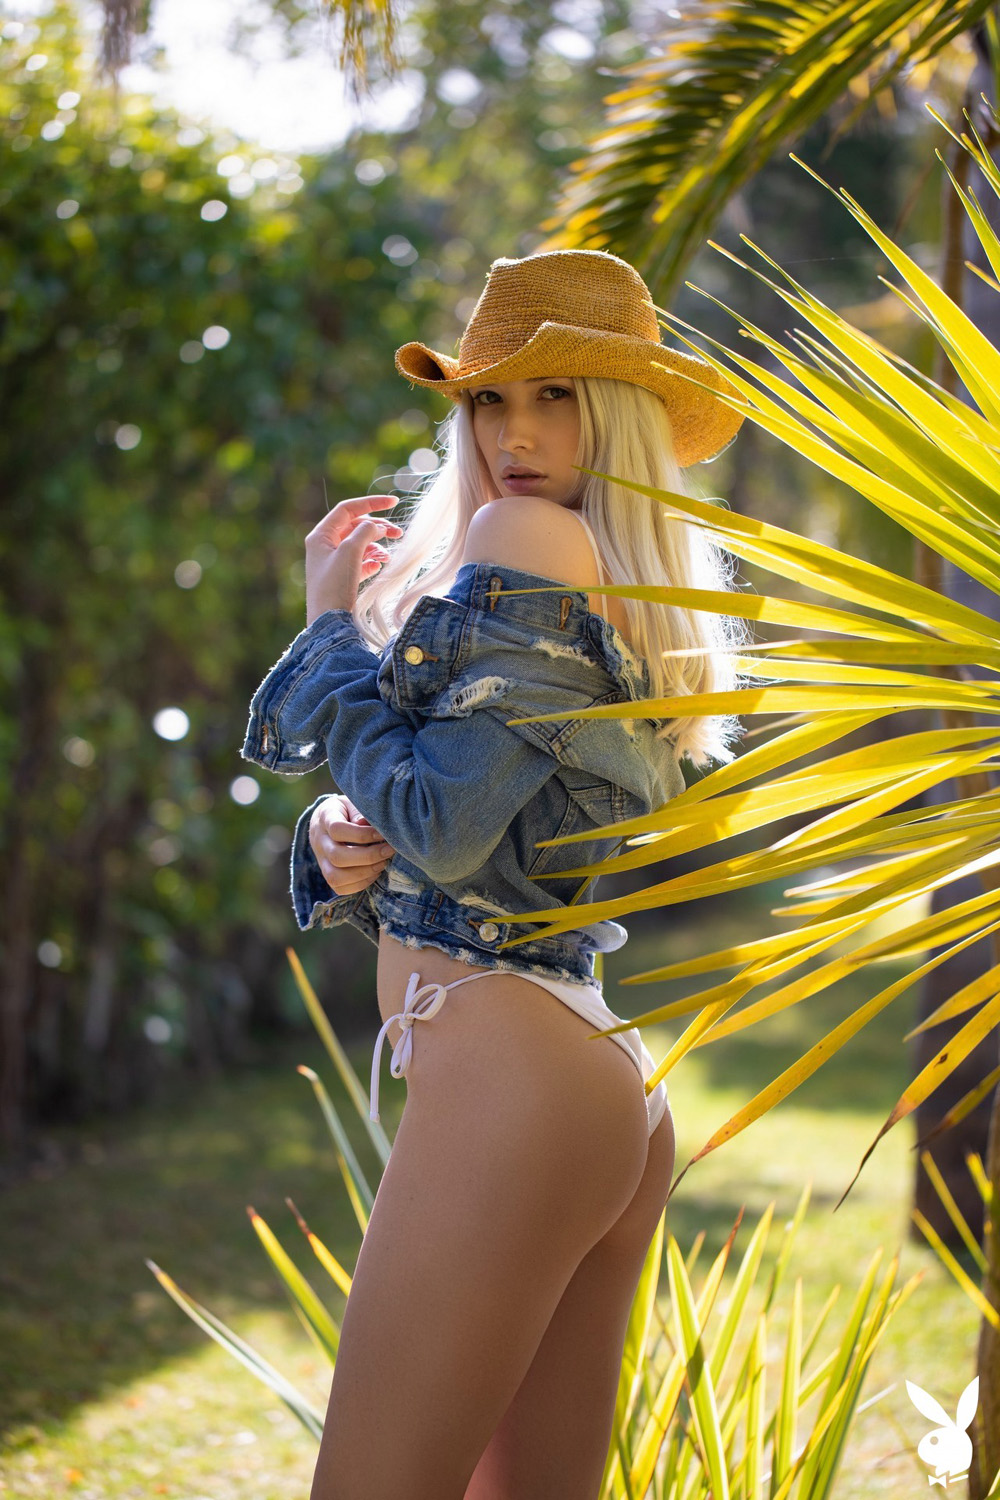 Monica Wasp exposes her perfect curves by the palm trees